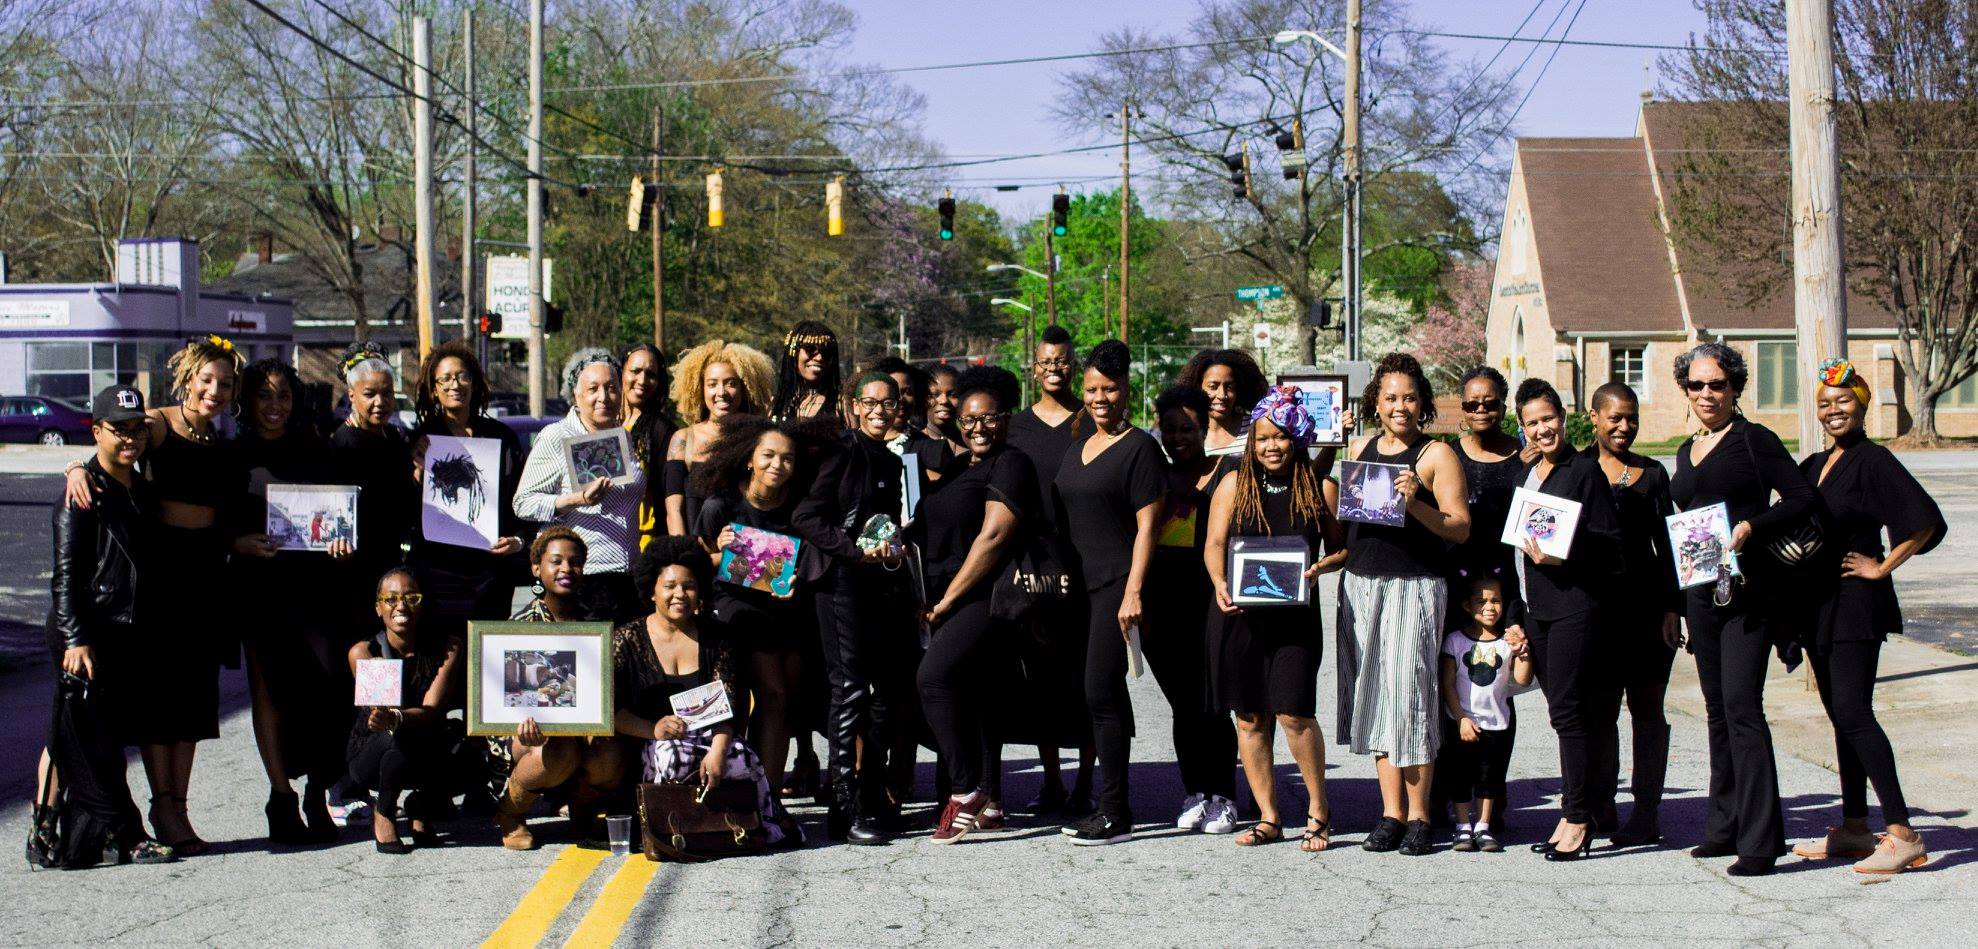 A photograph of around 30 individuals standing in the middle of a road dressed in black and holding pieces of artwork.